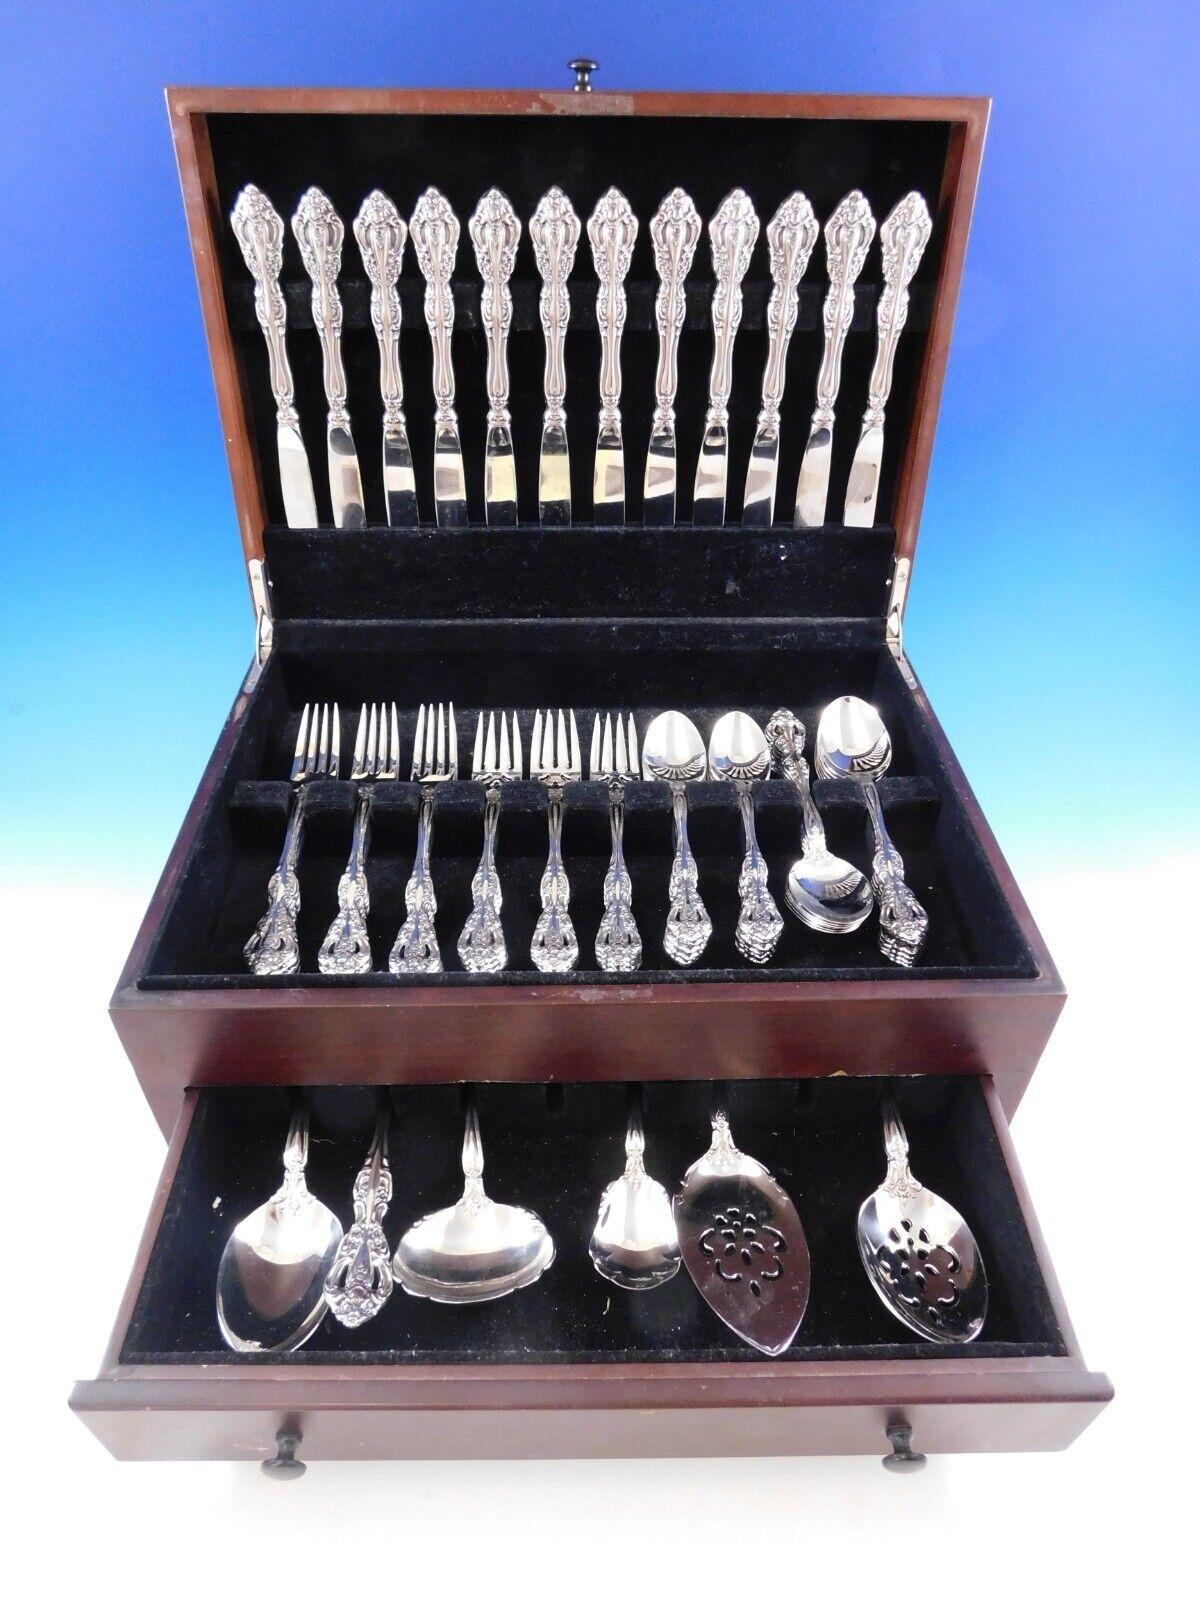 Michelangelo by Oneida Stainless Steel Flatware set, 69 pieces. This set includes:

12 Knives, 9